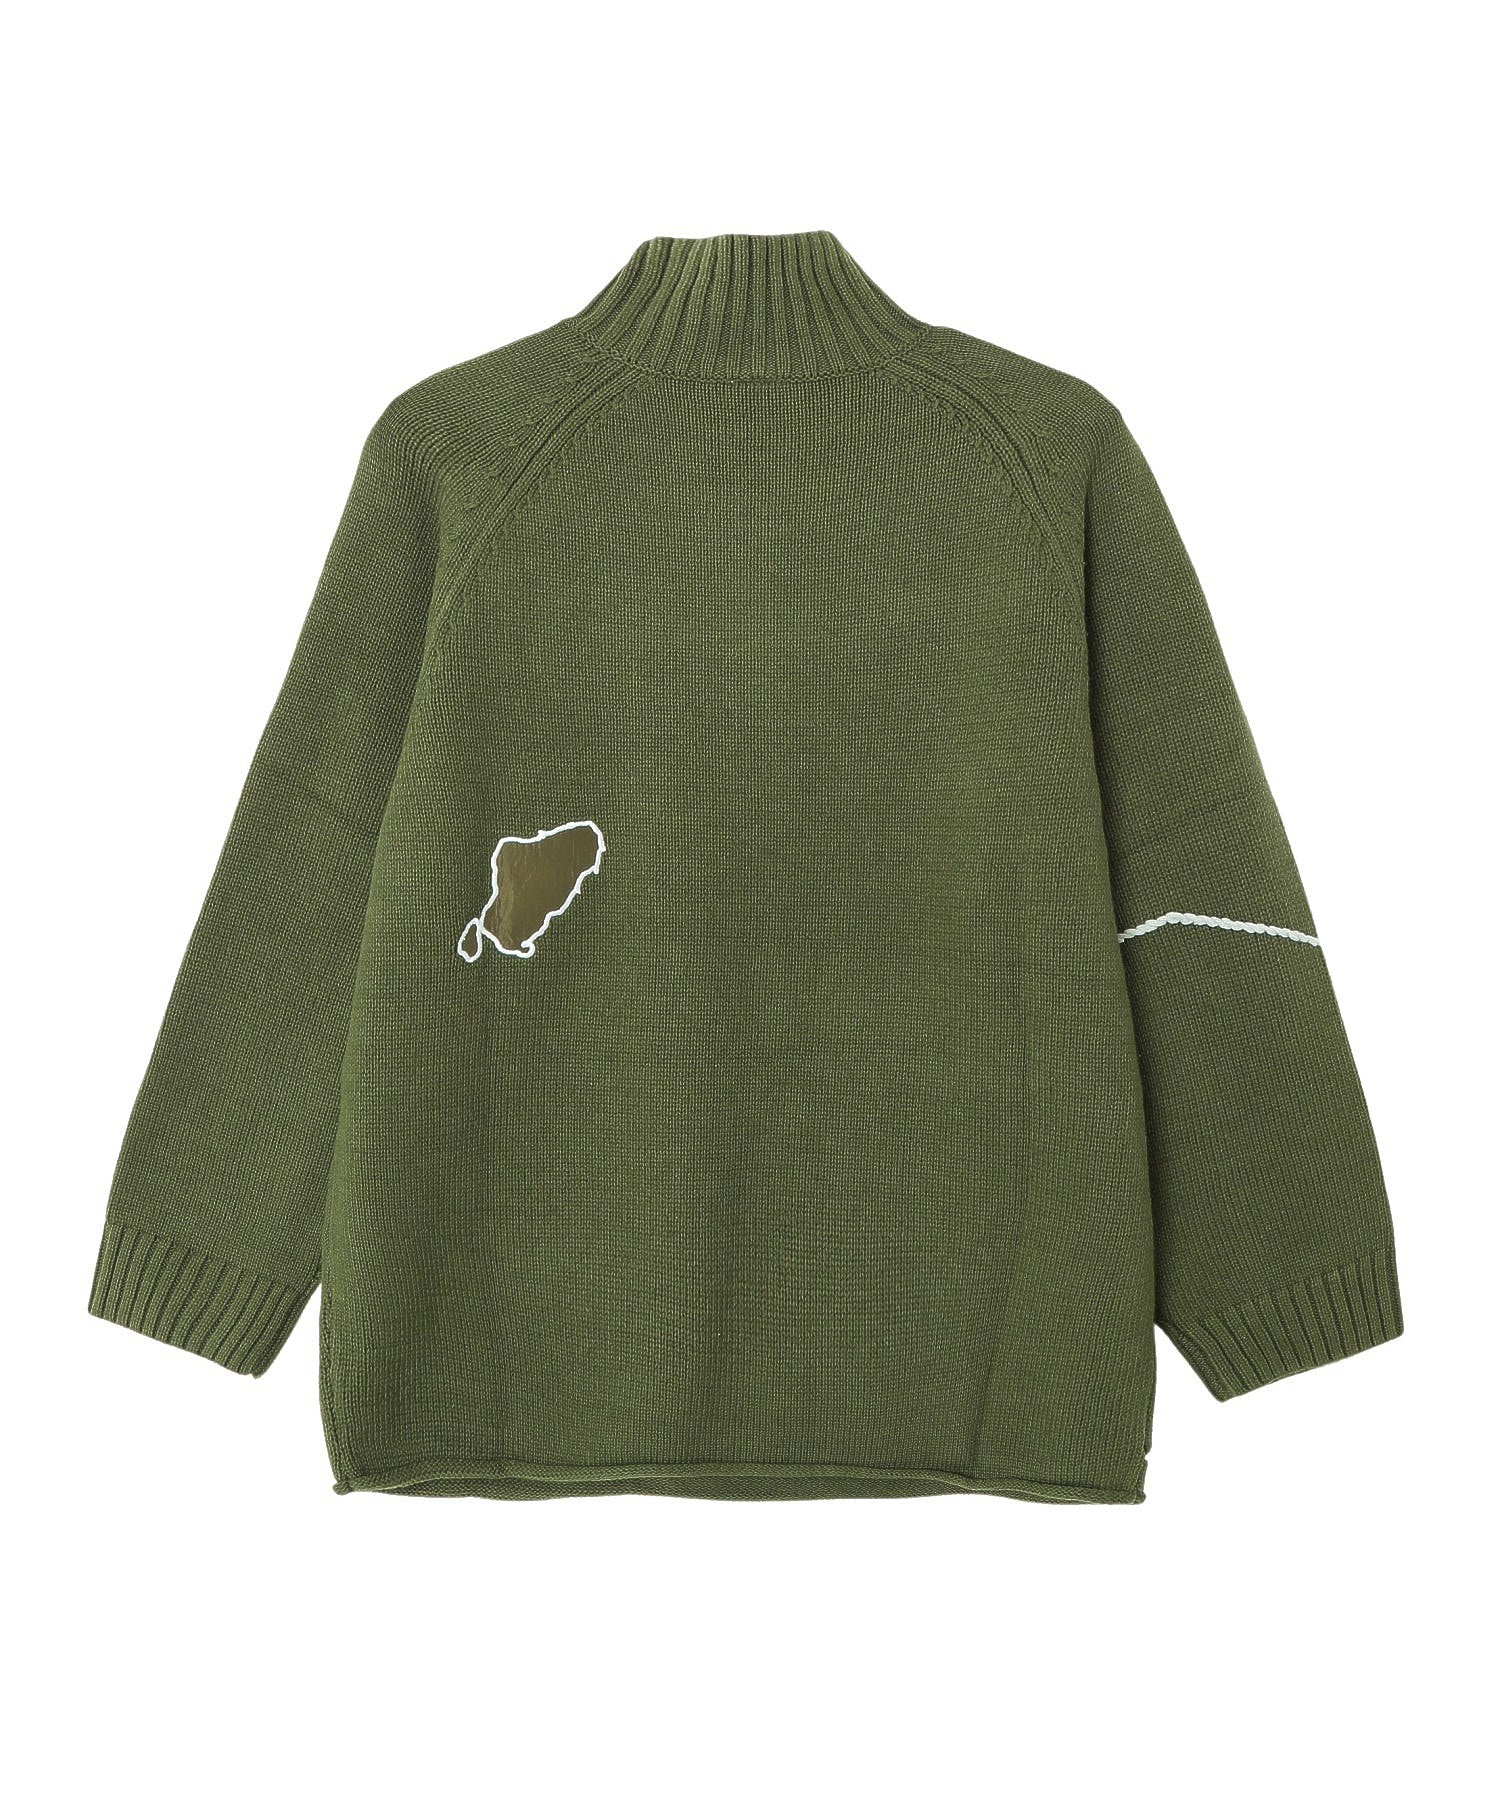 PERKS AND MINI/パークスアンドミニ/RELIEF HIGH NECK KNIT/8623